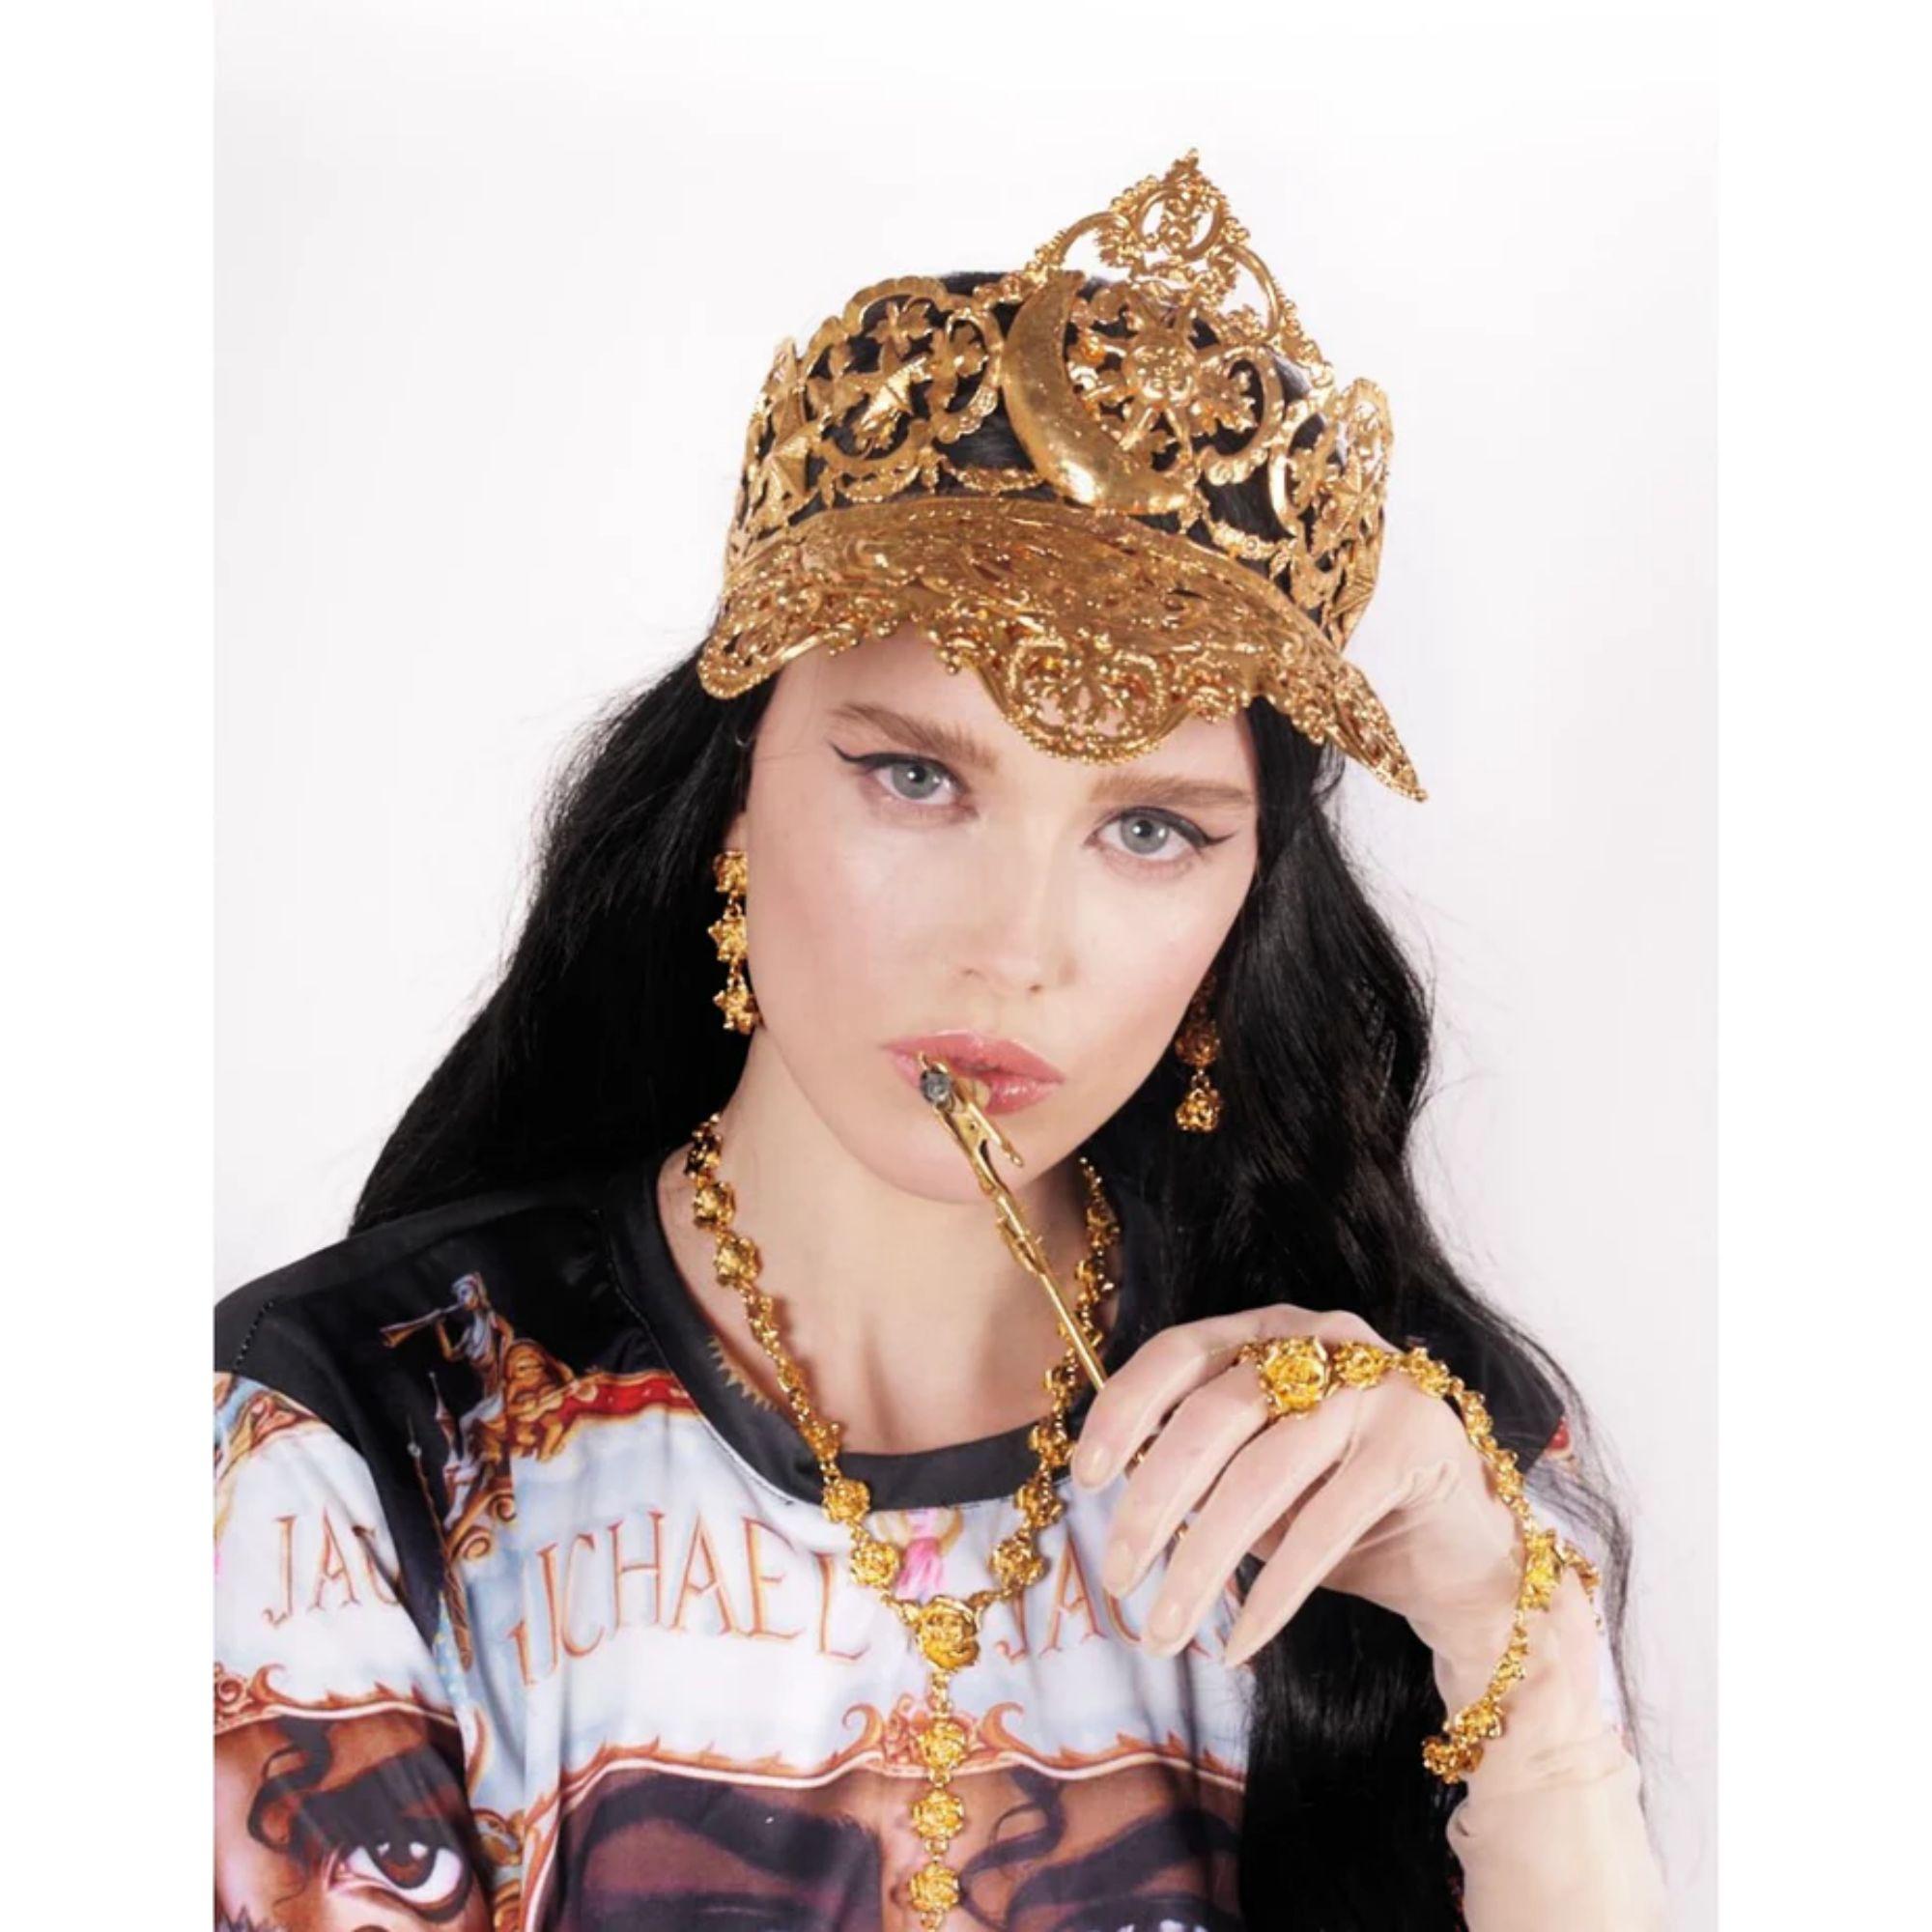 Baroque, handmade, versatile cap made of hundreds of findings and handmade pieces. This one of a kind headpiece is fit for a queen, imagine Cleopatra playing tennis wearing this a matching gold set. Hand molded, the cap may be worn with the visor up